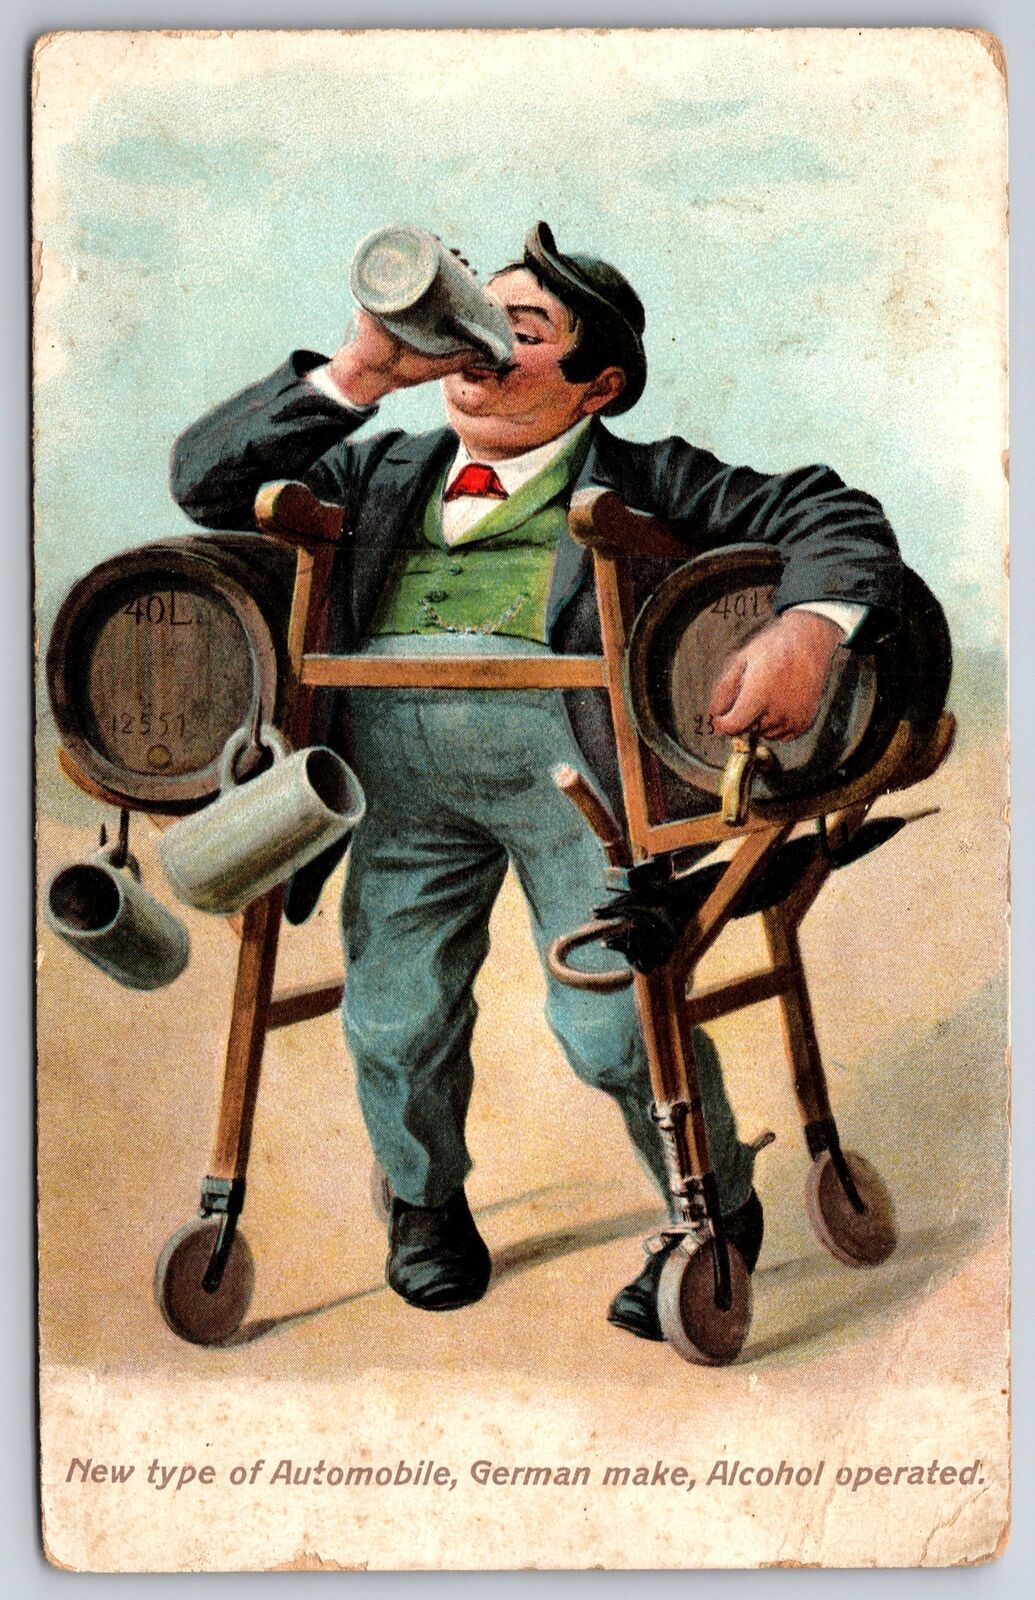 Comic~Alcohol Operated Auto~Beer Kegs Hold Man Up @ Drinking~German Make 1908